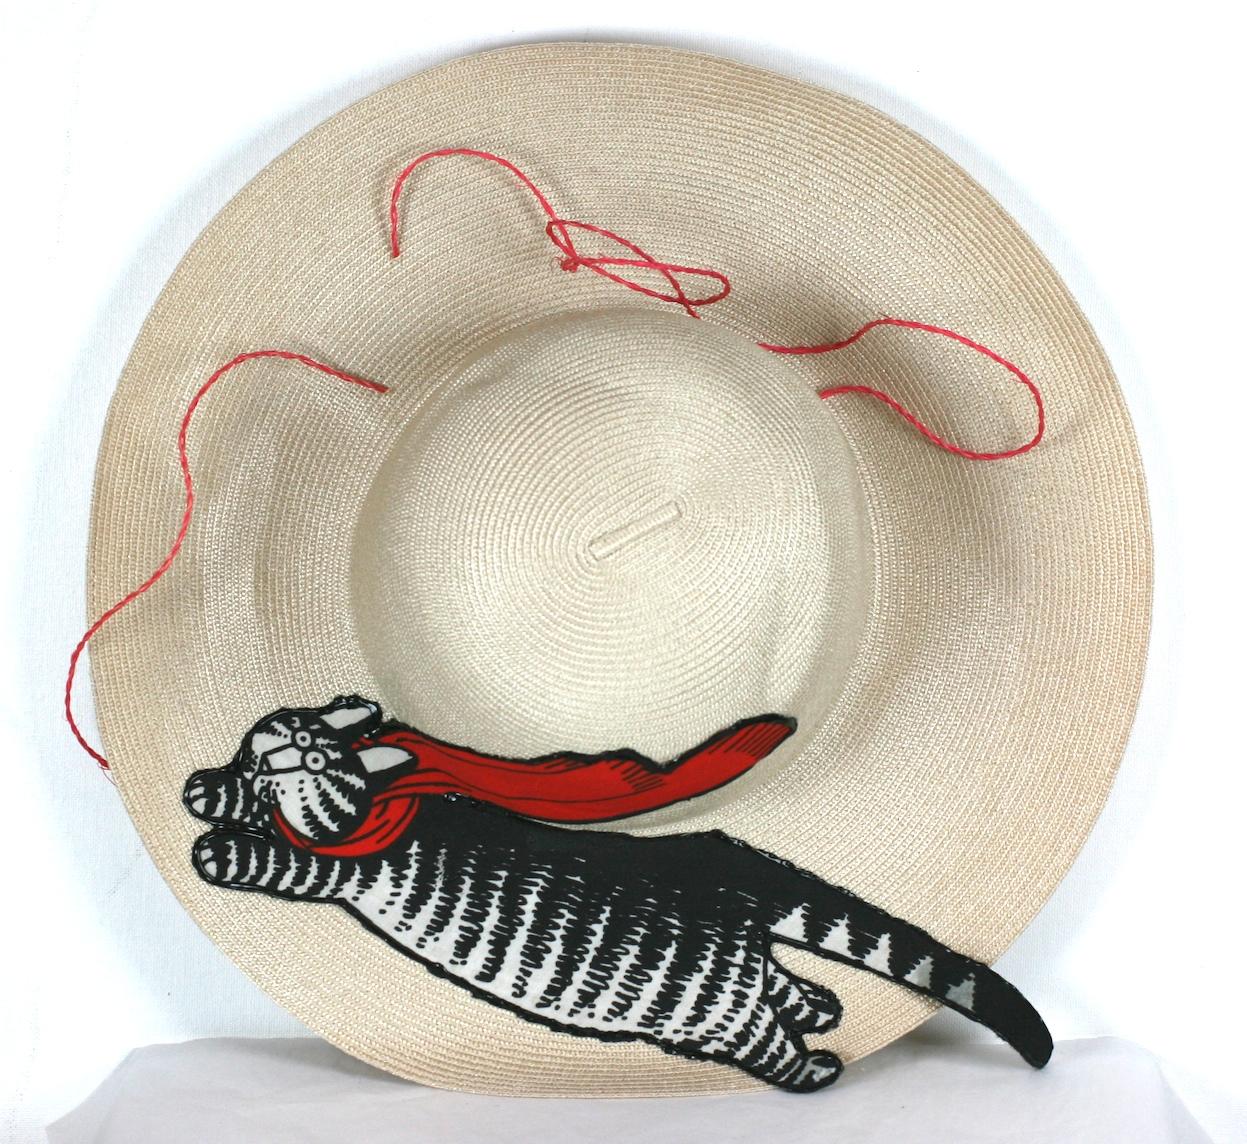 Charming Straw hat with applied flying Kliban cat in mid flight chasing red string woven around brim. Motif is the famous flying cat by cartoonist Bernard Kliban.
Perfect for channeling your future crazy cat lady outfits. 
Brim 4